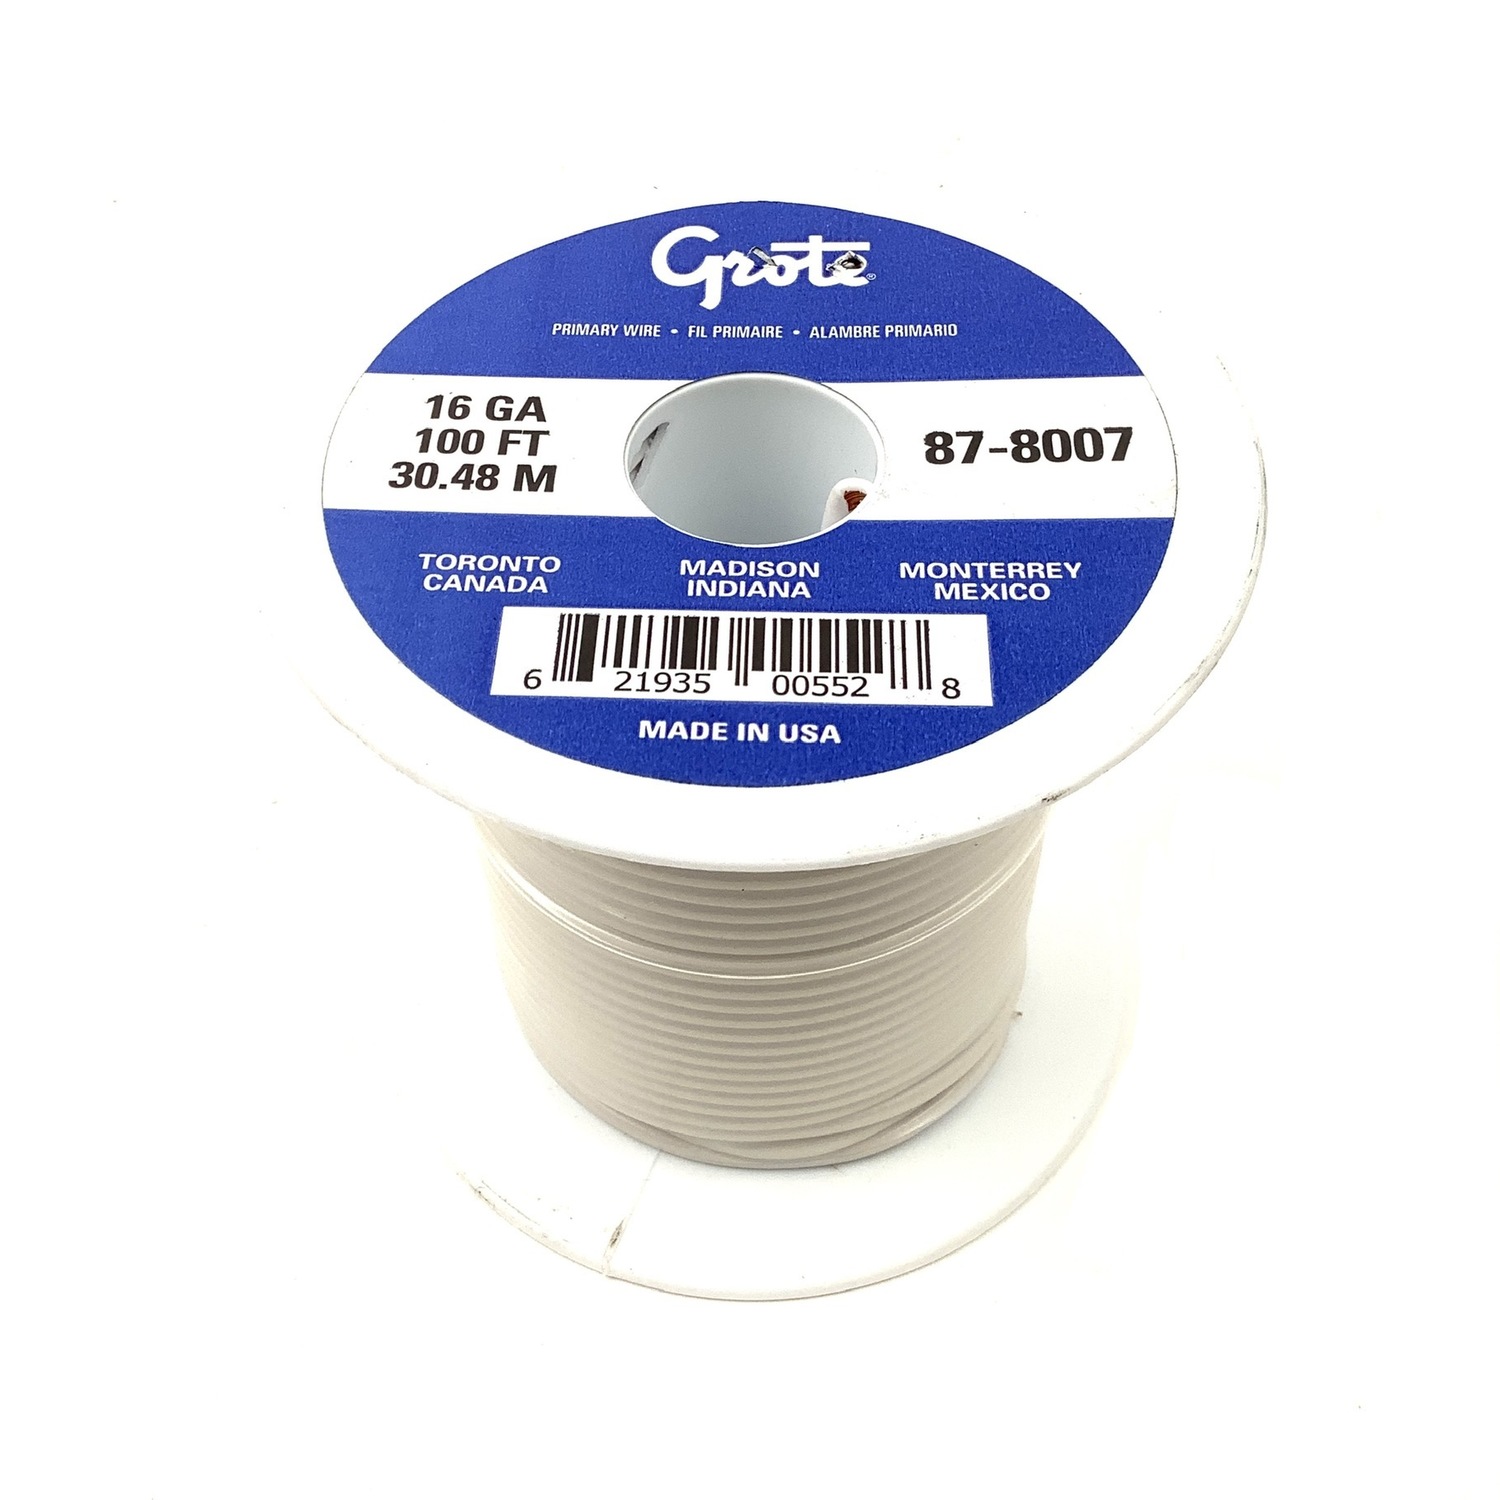 Grote 87-8007 - Primary Wire, 16 Gauge, White, 100 ft Spool